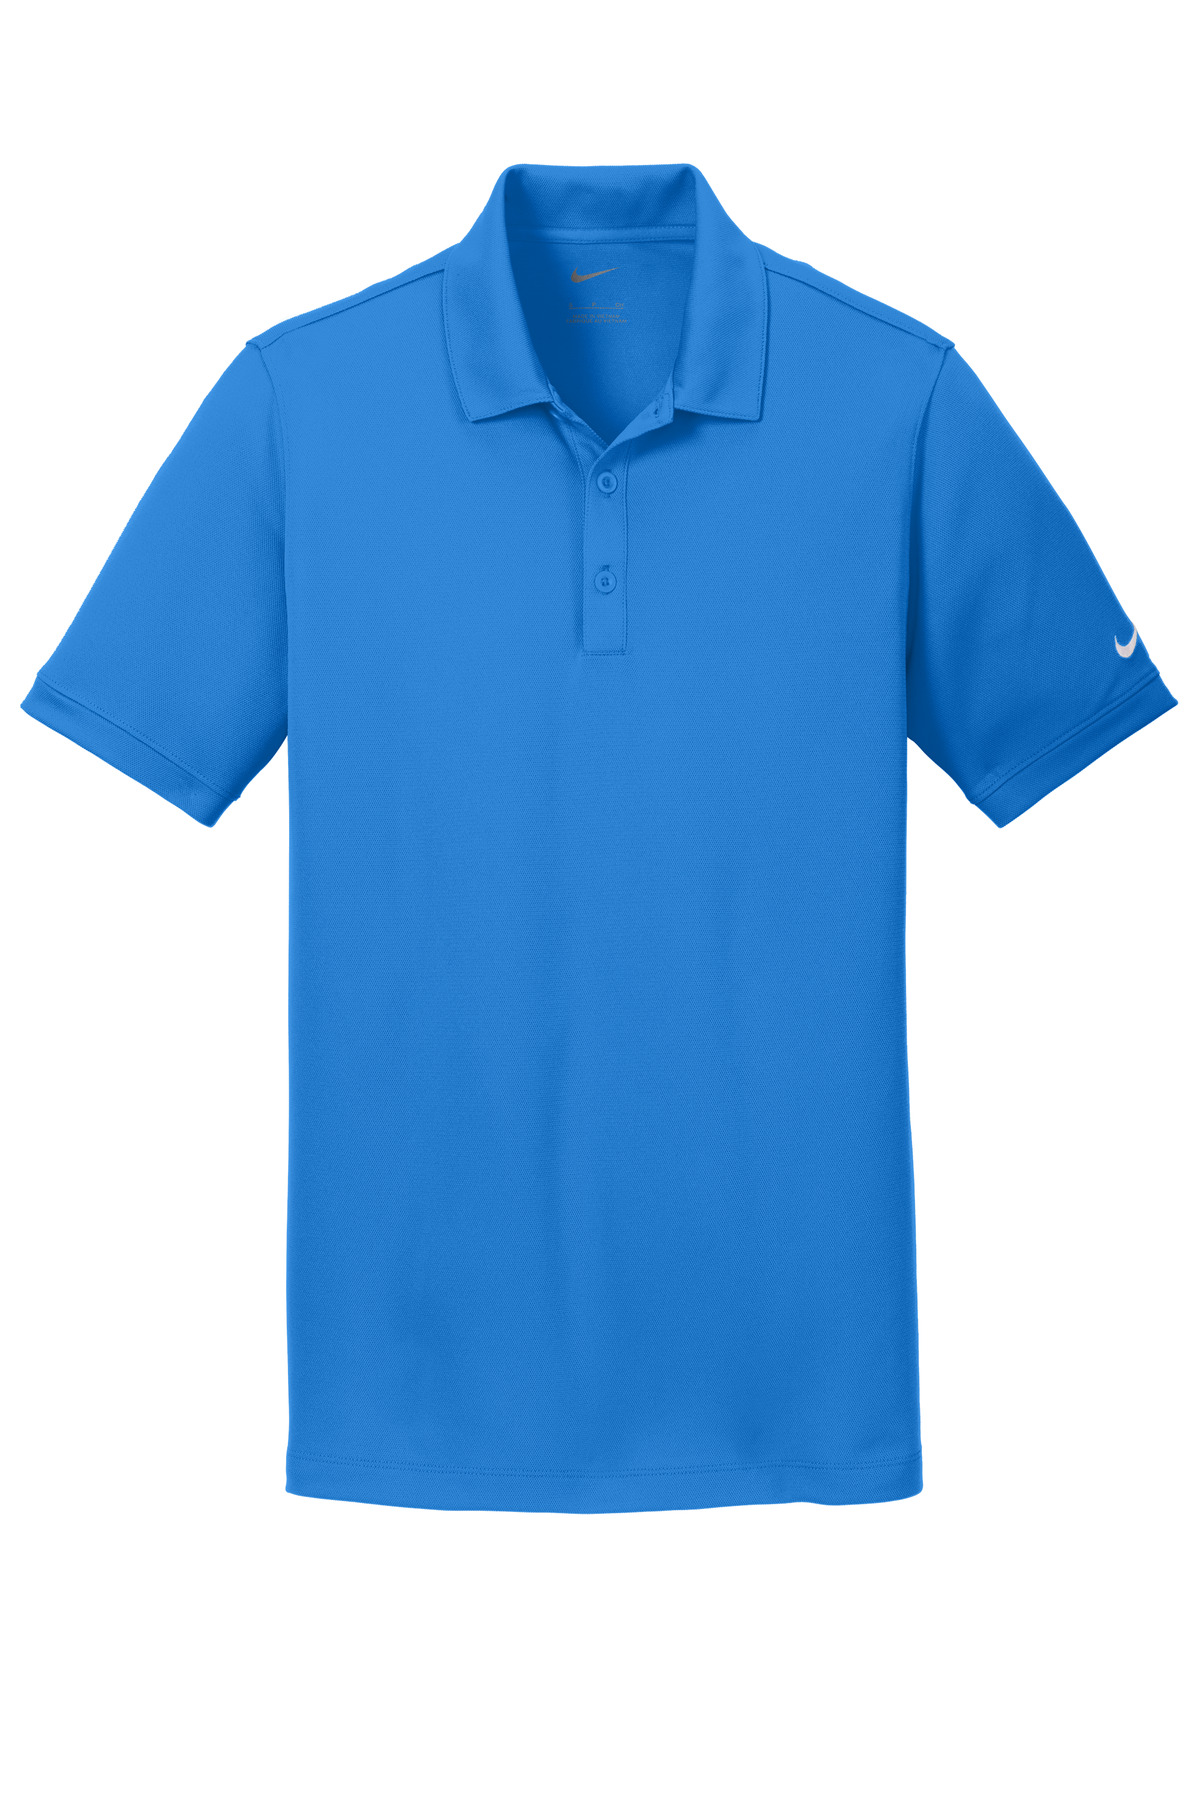 Dri-FIT Solid Icon Pique Modern Fit Polo - 746099